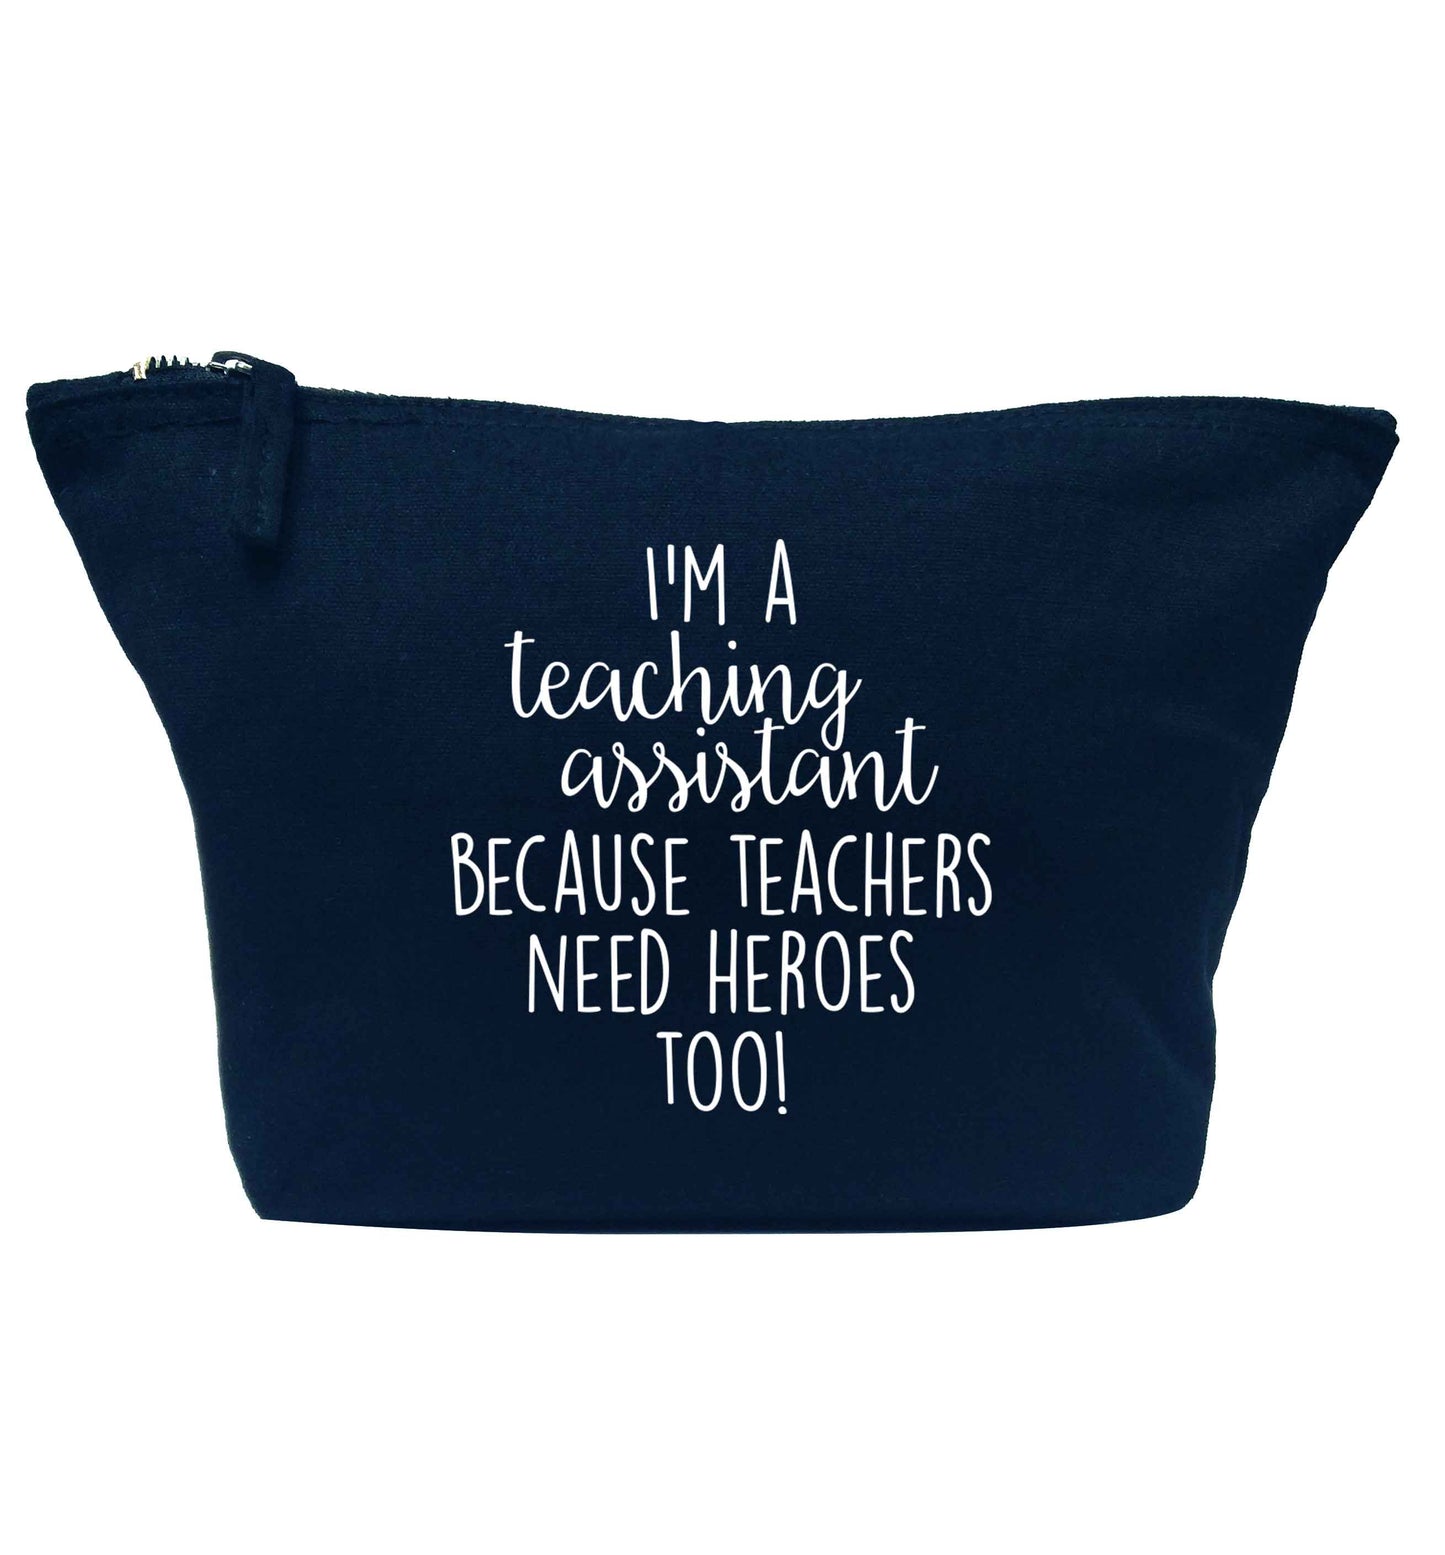 I'm a teaching assistant because teachers need heroes too! navy makeup bag